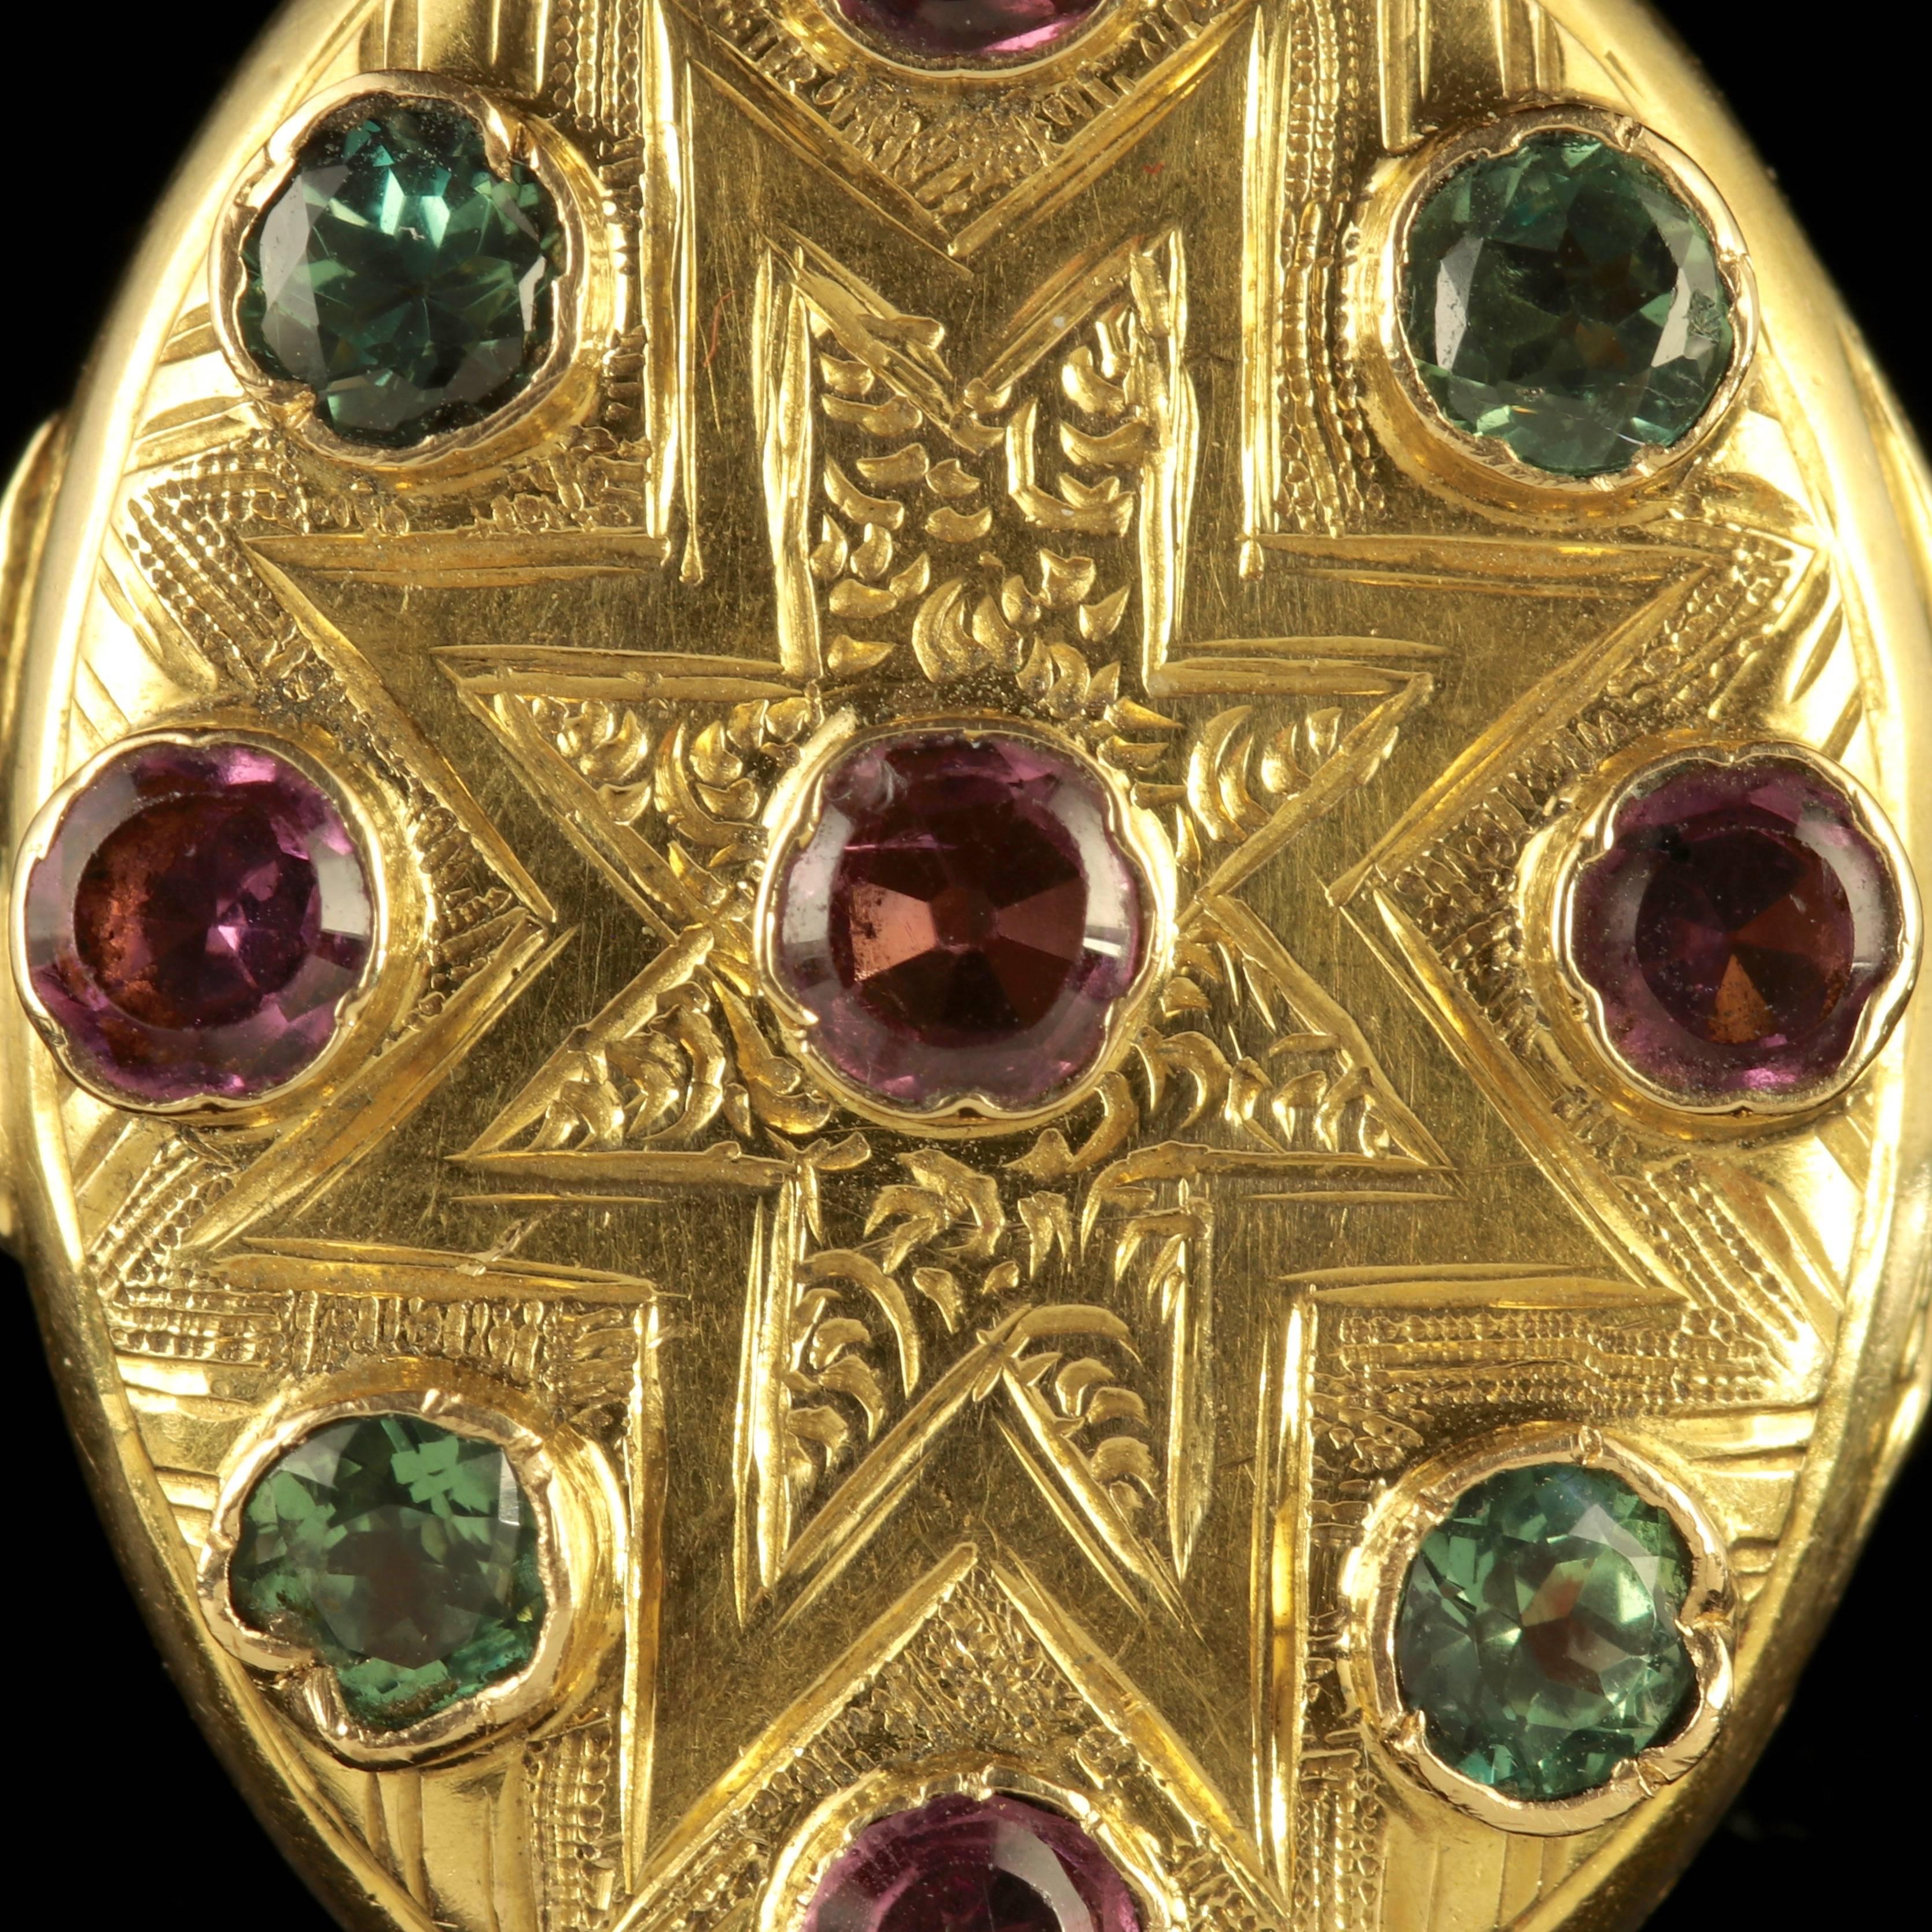 To read more please click continue reading below-

This fabulous antique 18ct Yellow Gold French Victorian locket is set with Tourmalines and Amethyst.

The locket displays a beautifully engraved front and back, set with the most breath taking